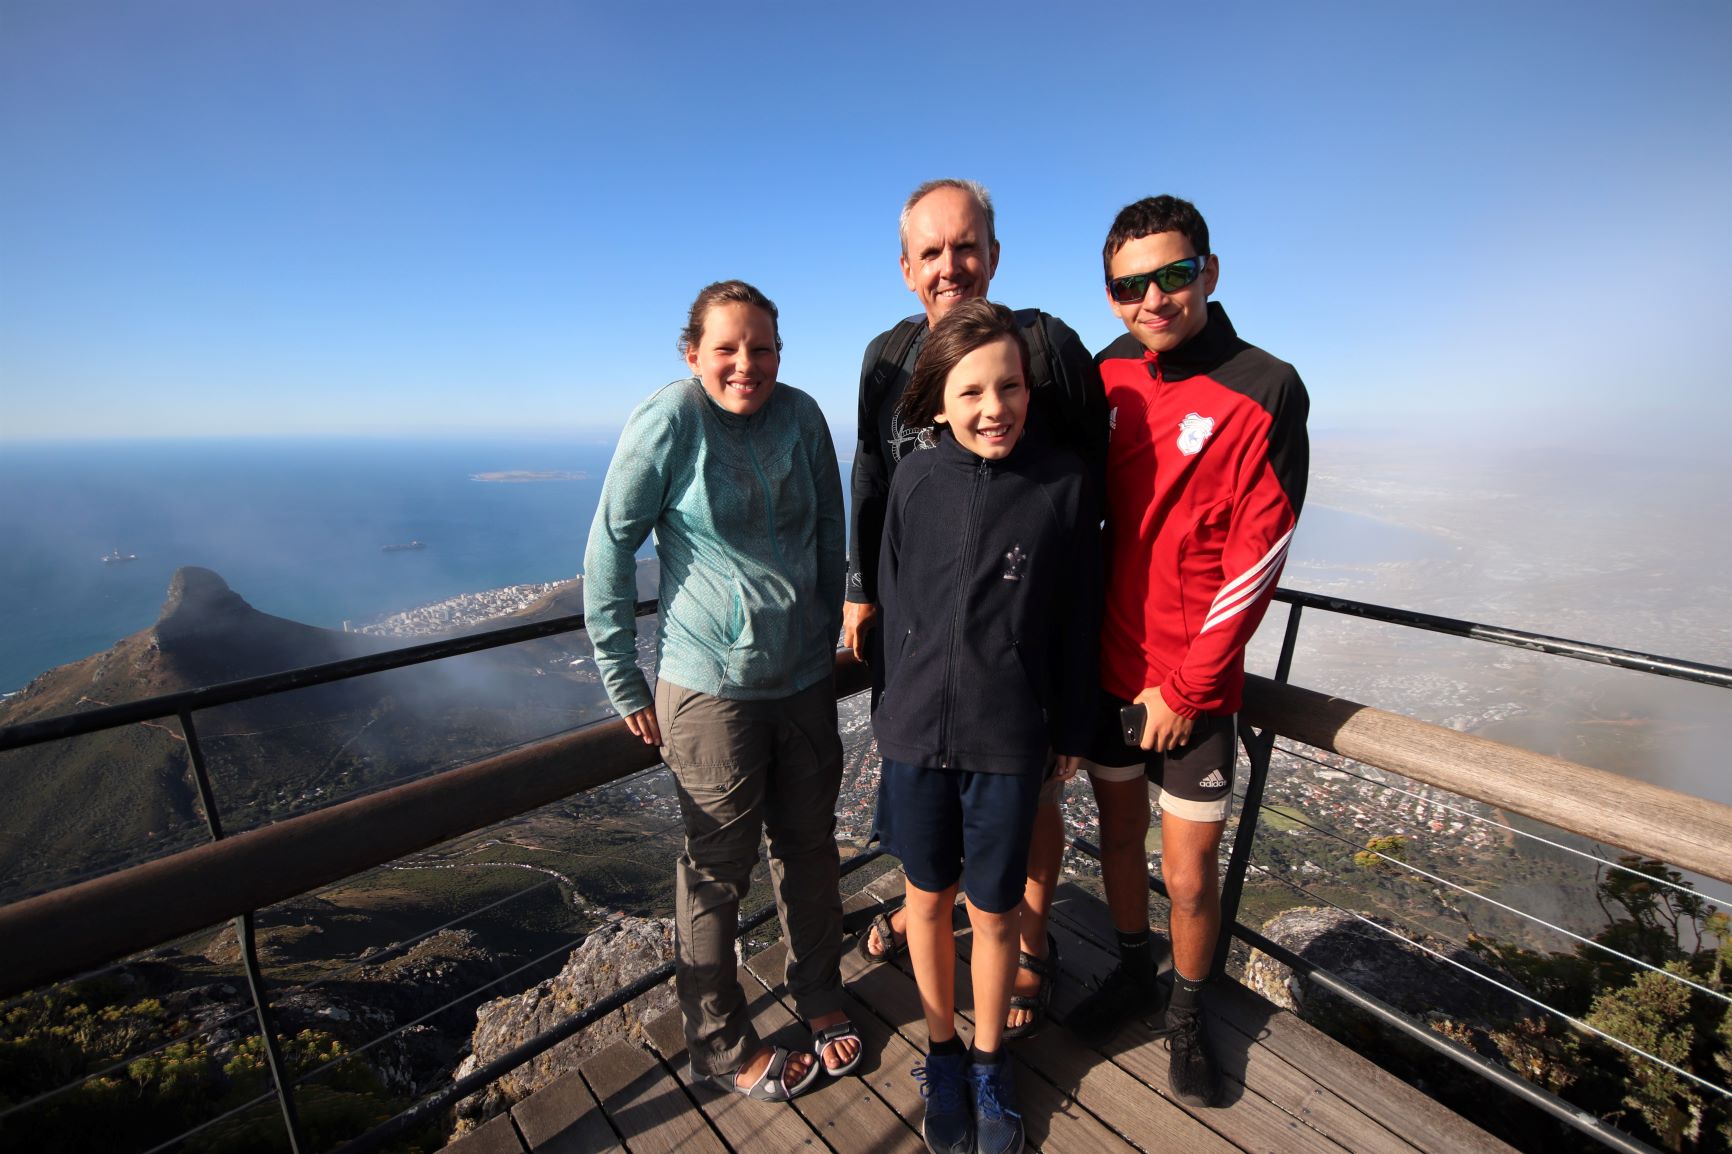 At the top of Table Mountain, Cape Town